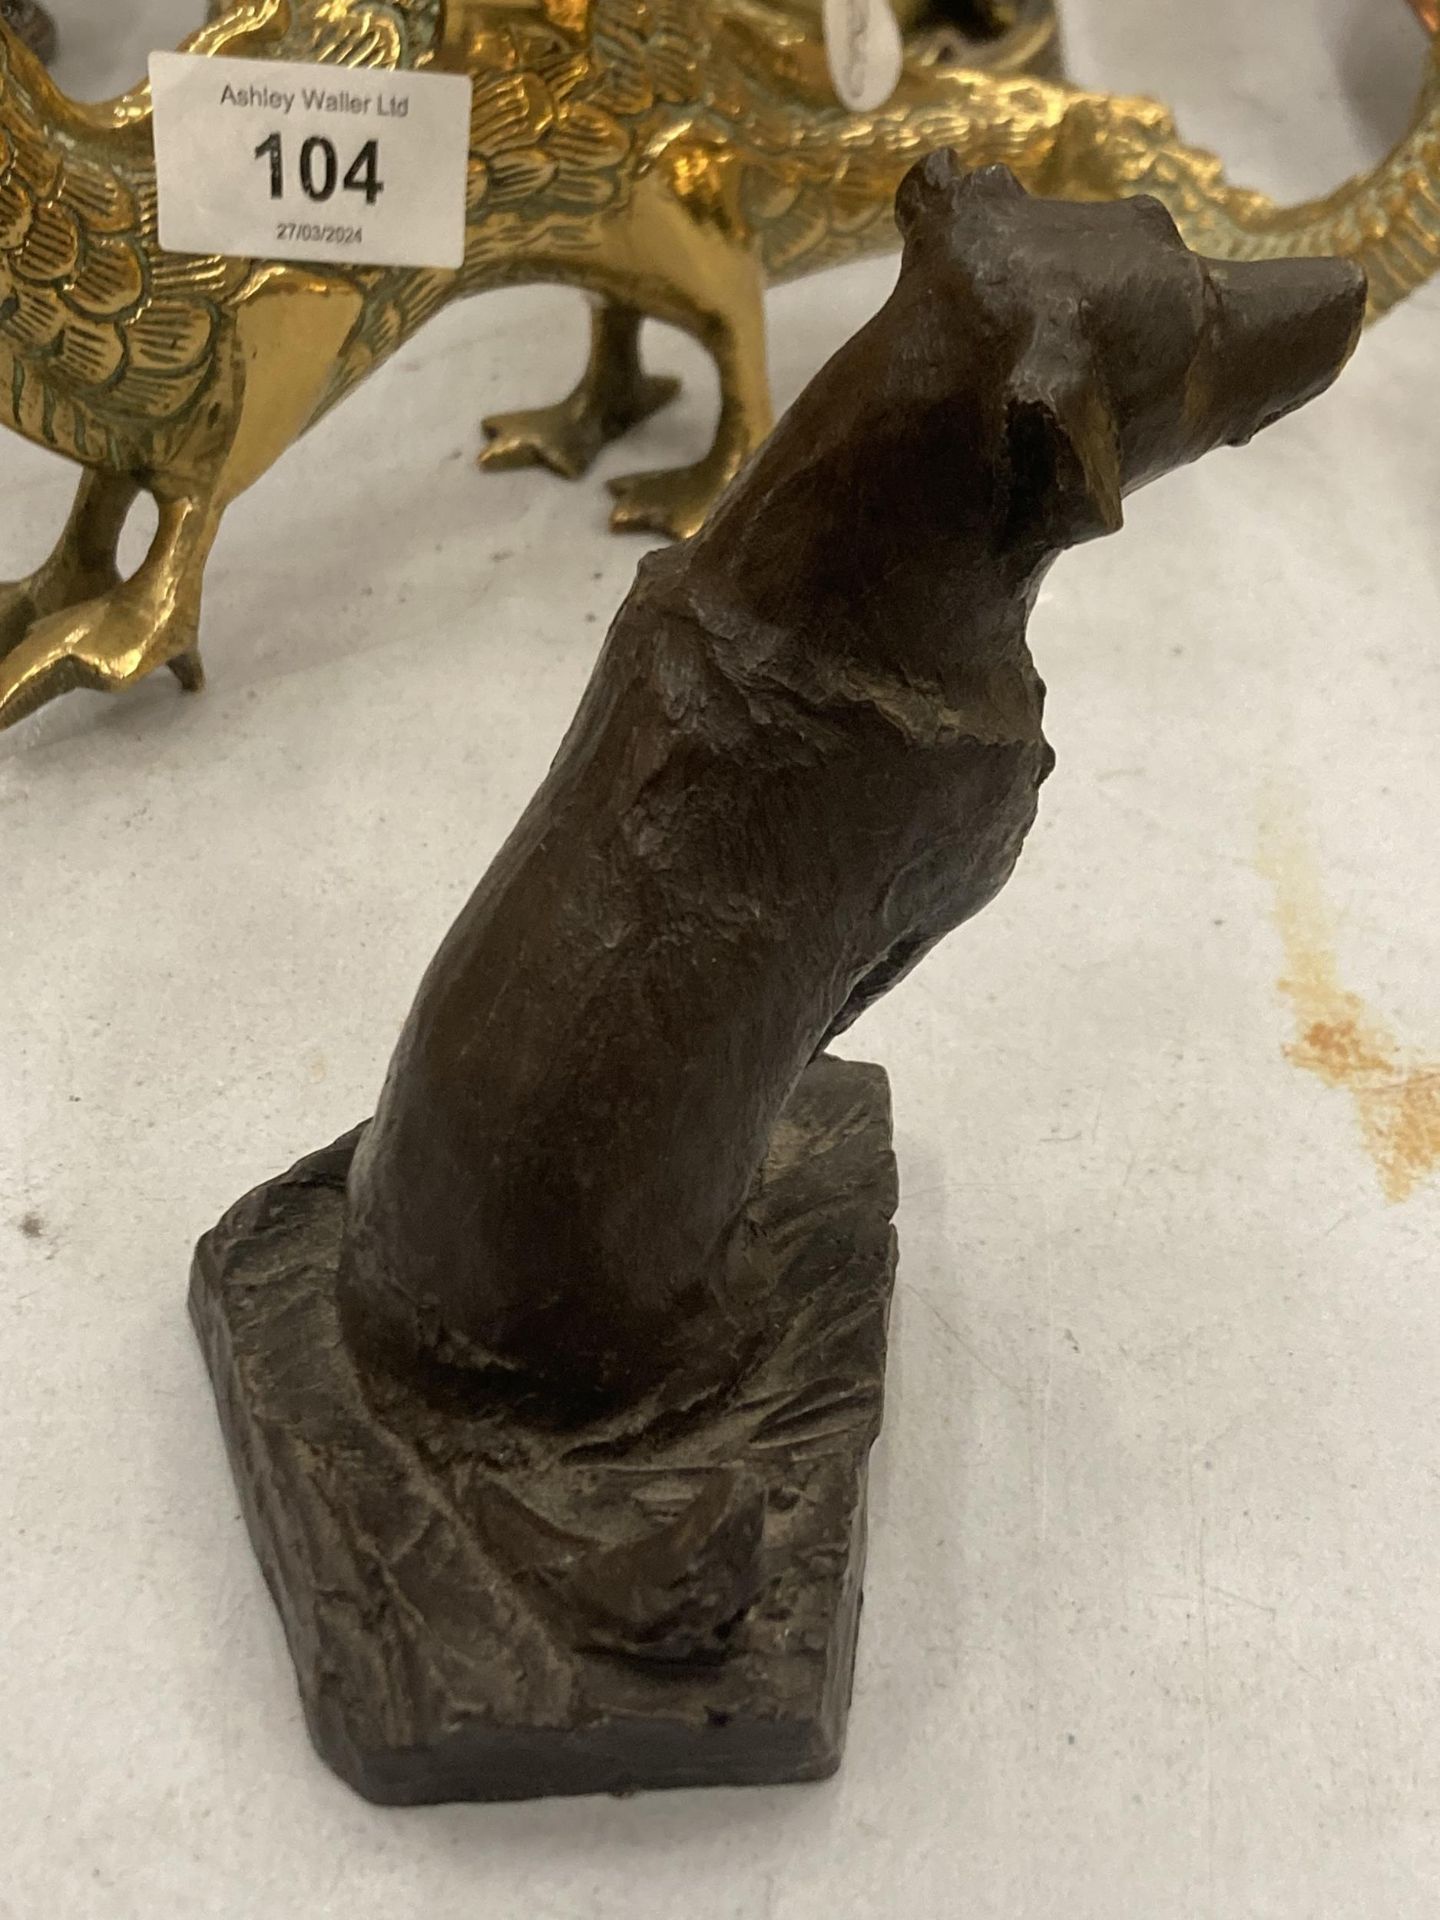 A STONE FIGURE OF A DOG WITH A BRONZED FINISH, HEIGHT 10CM - Image 2 of 4